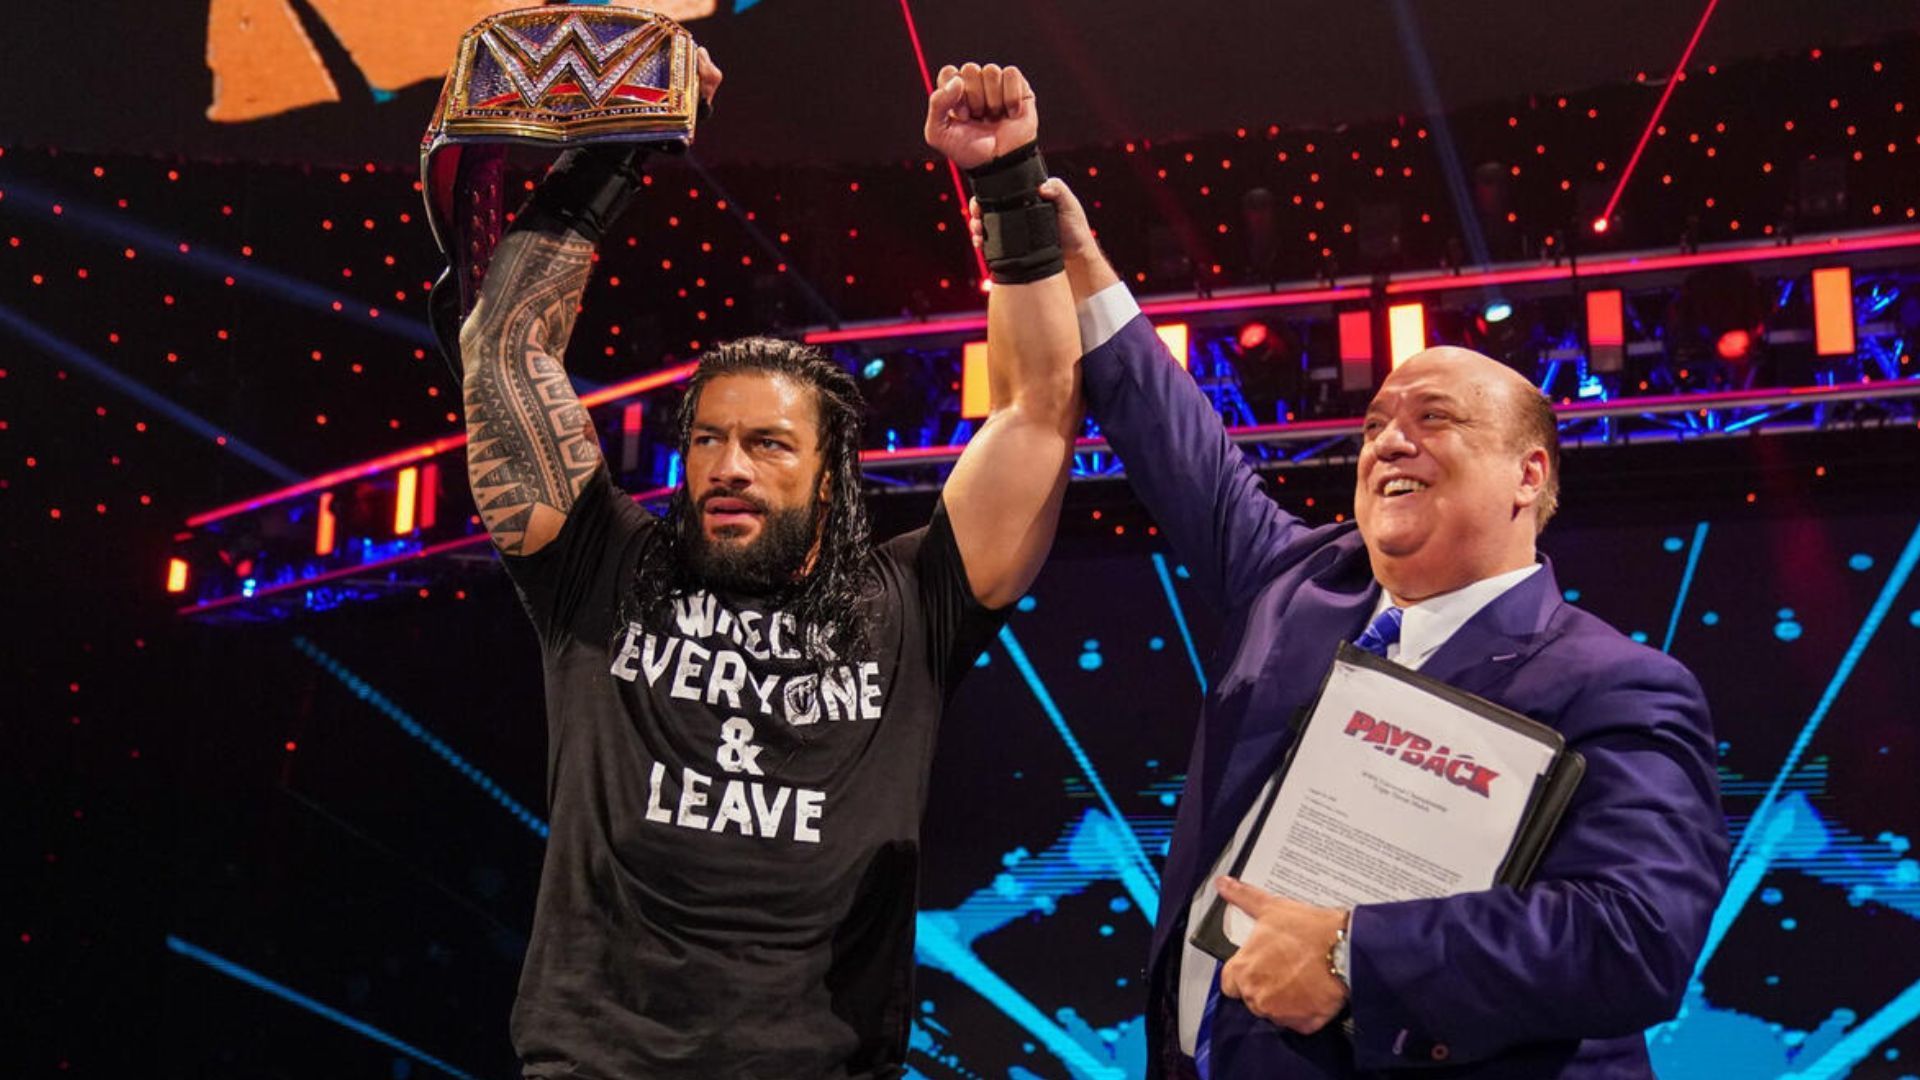 Roman Reigns became the Universal Champion at Payback 2020